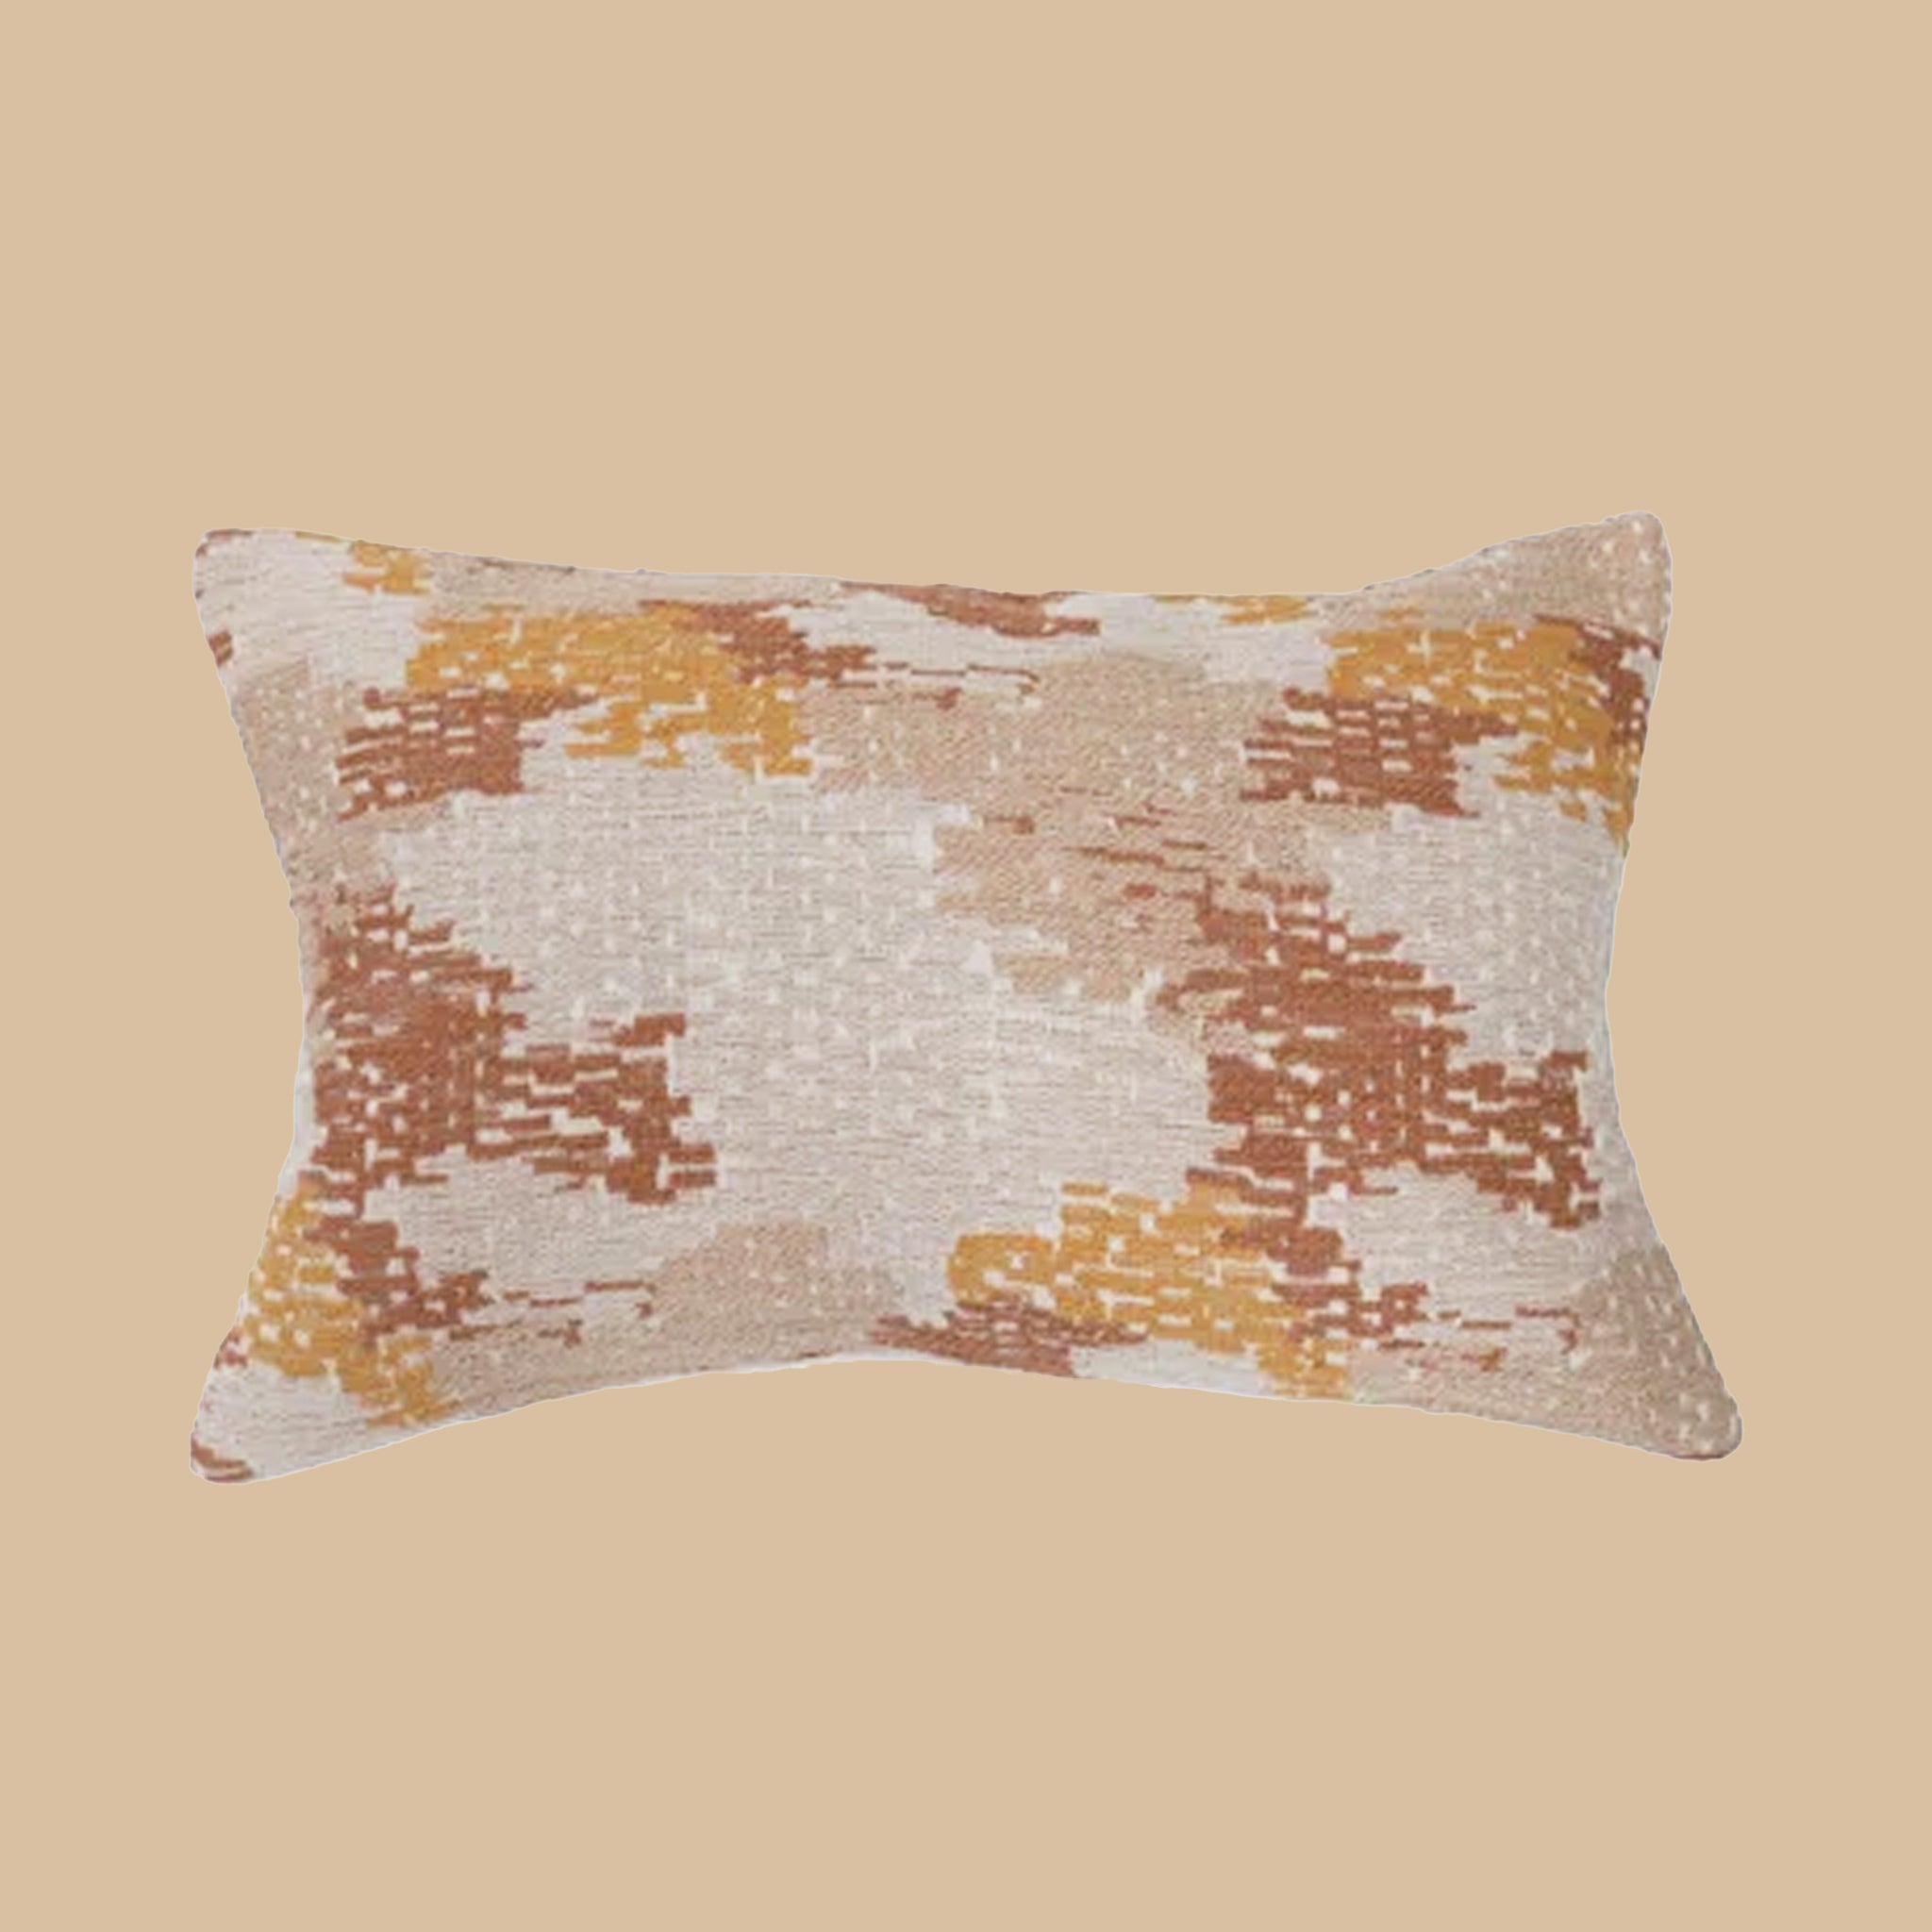 On a tan background is a lumbar pillow with a tan, burnt orange and rust colored design on it.